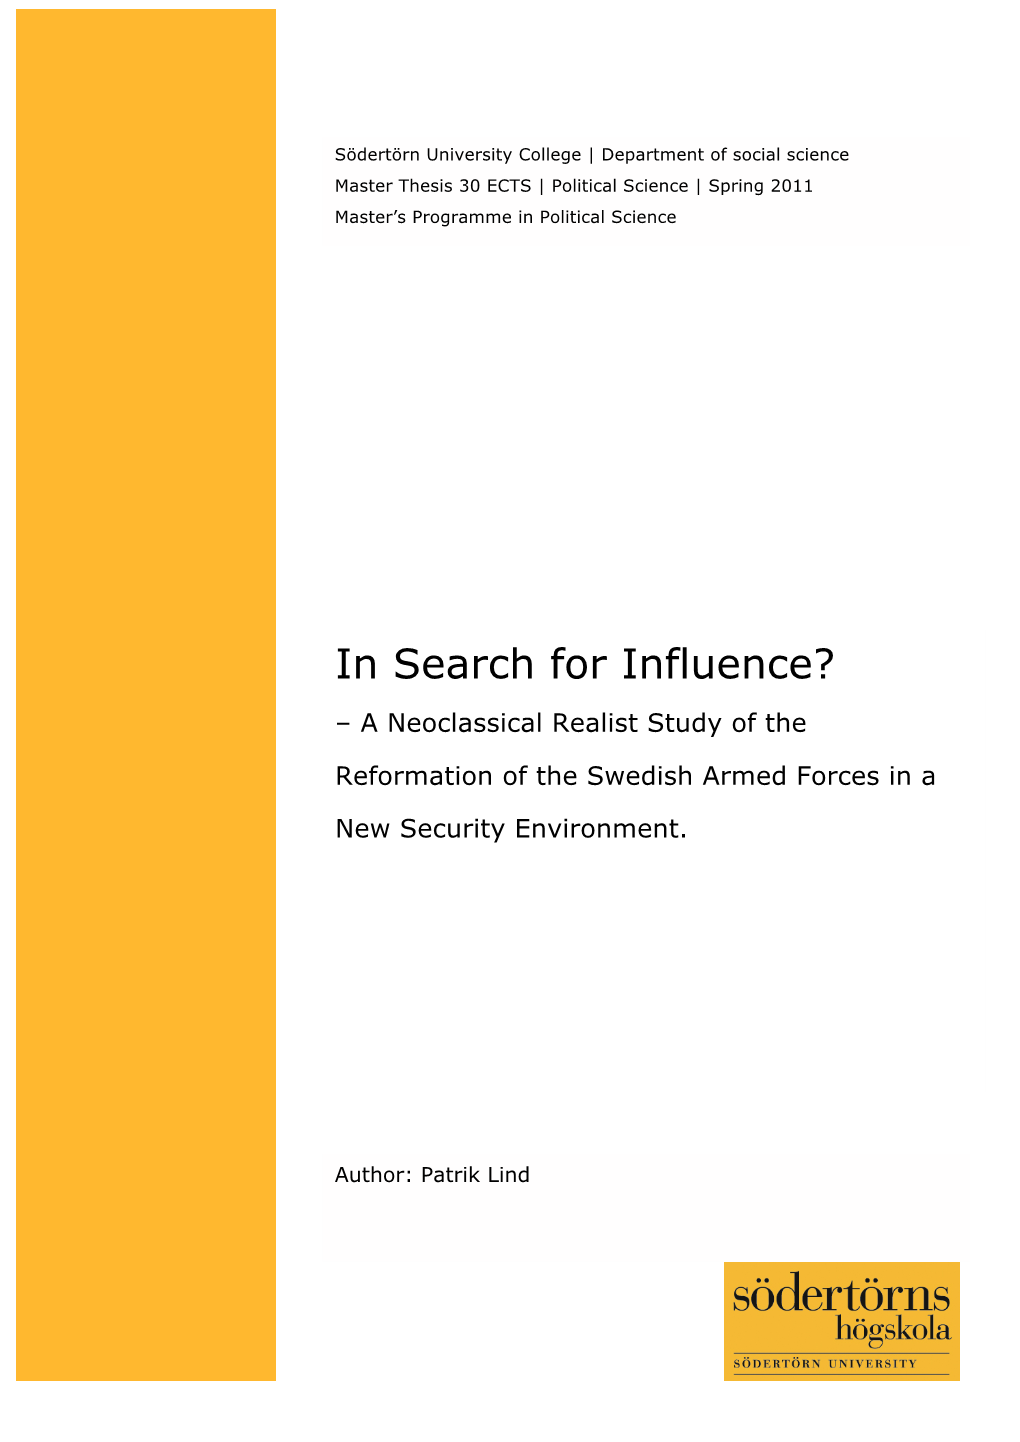 In Search for Influence? – a Neoclassical Realist Study of The